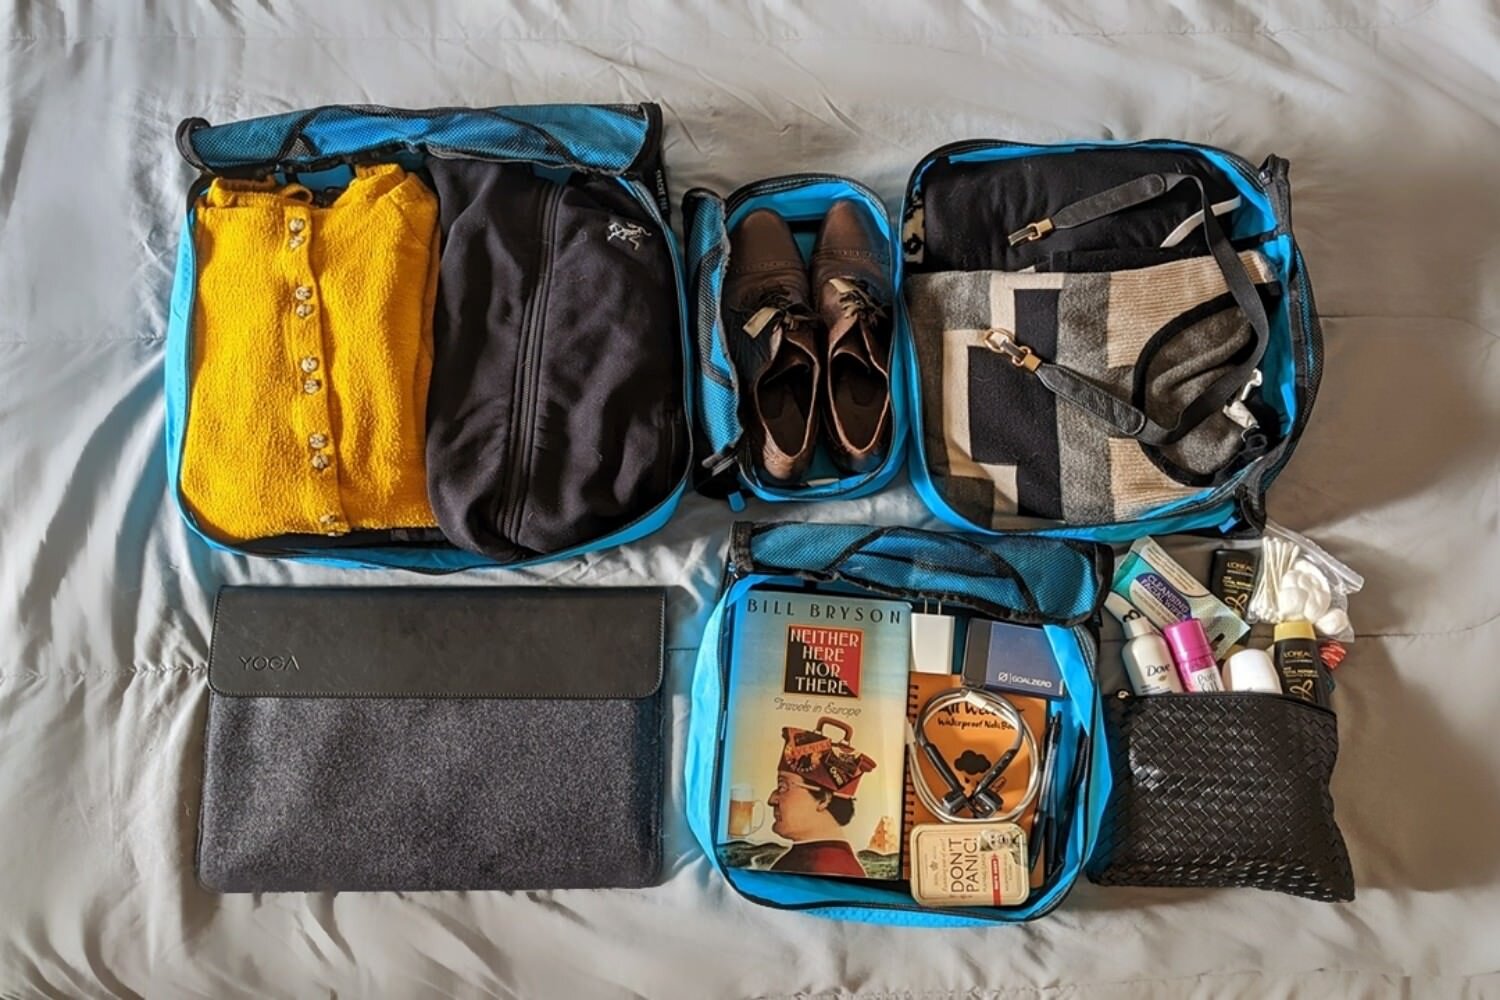 packing cubes are a great way to keep your things organized in your duffel bag